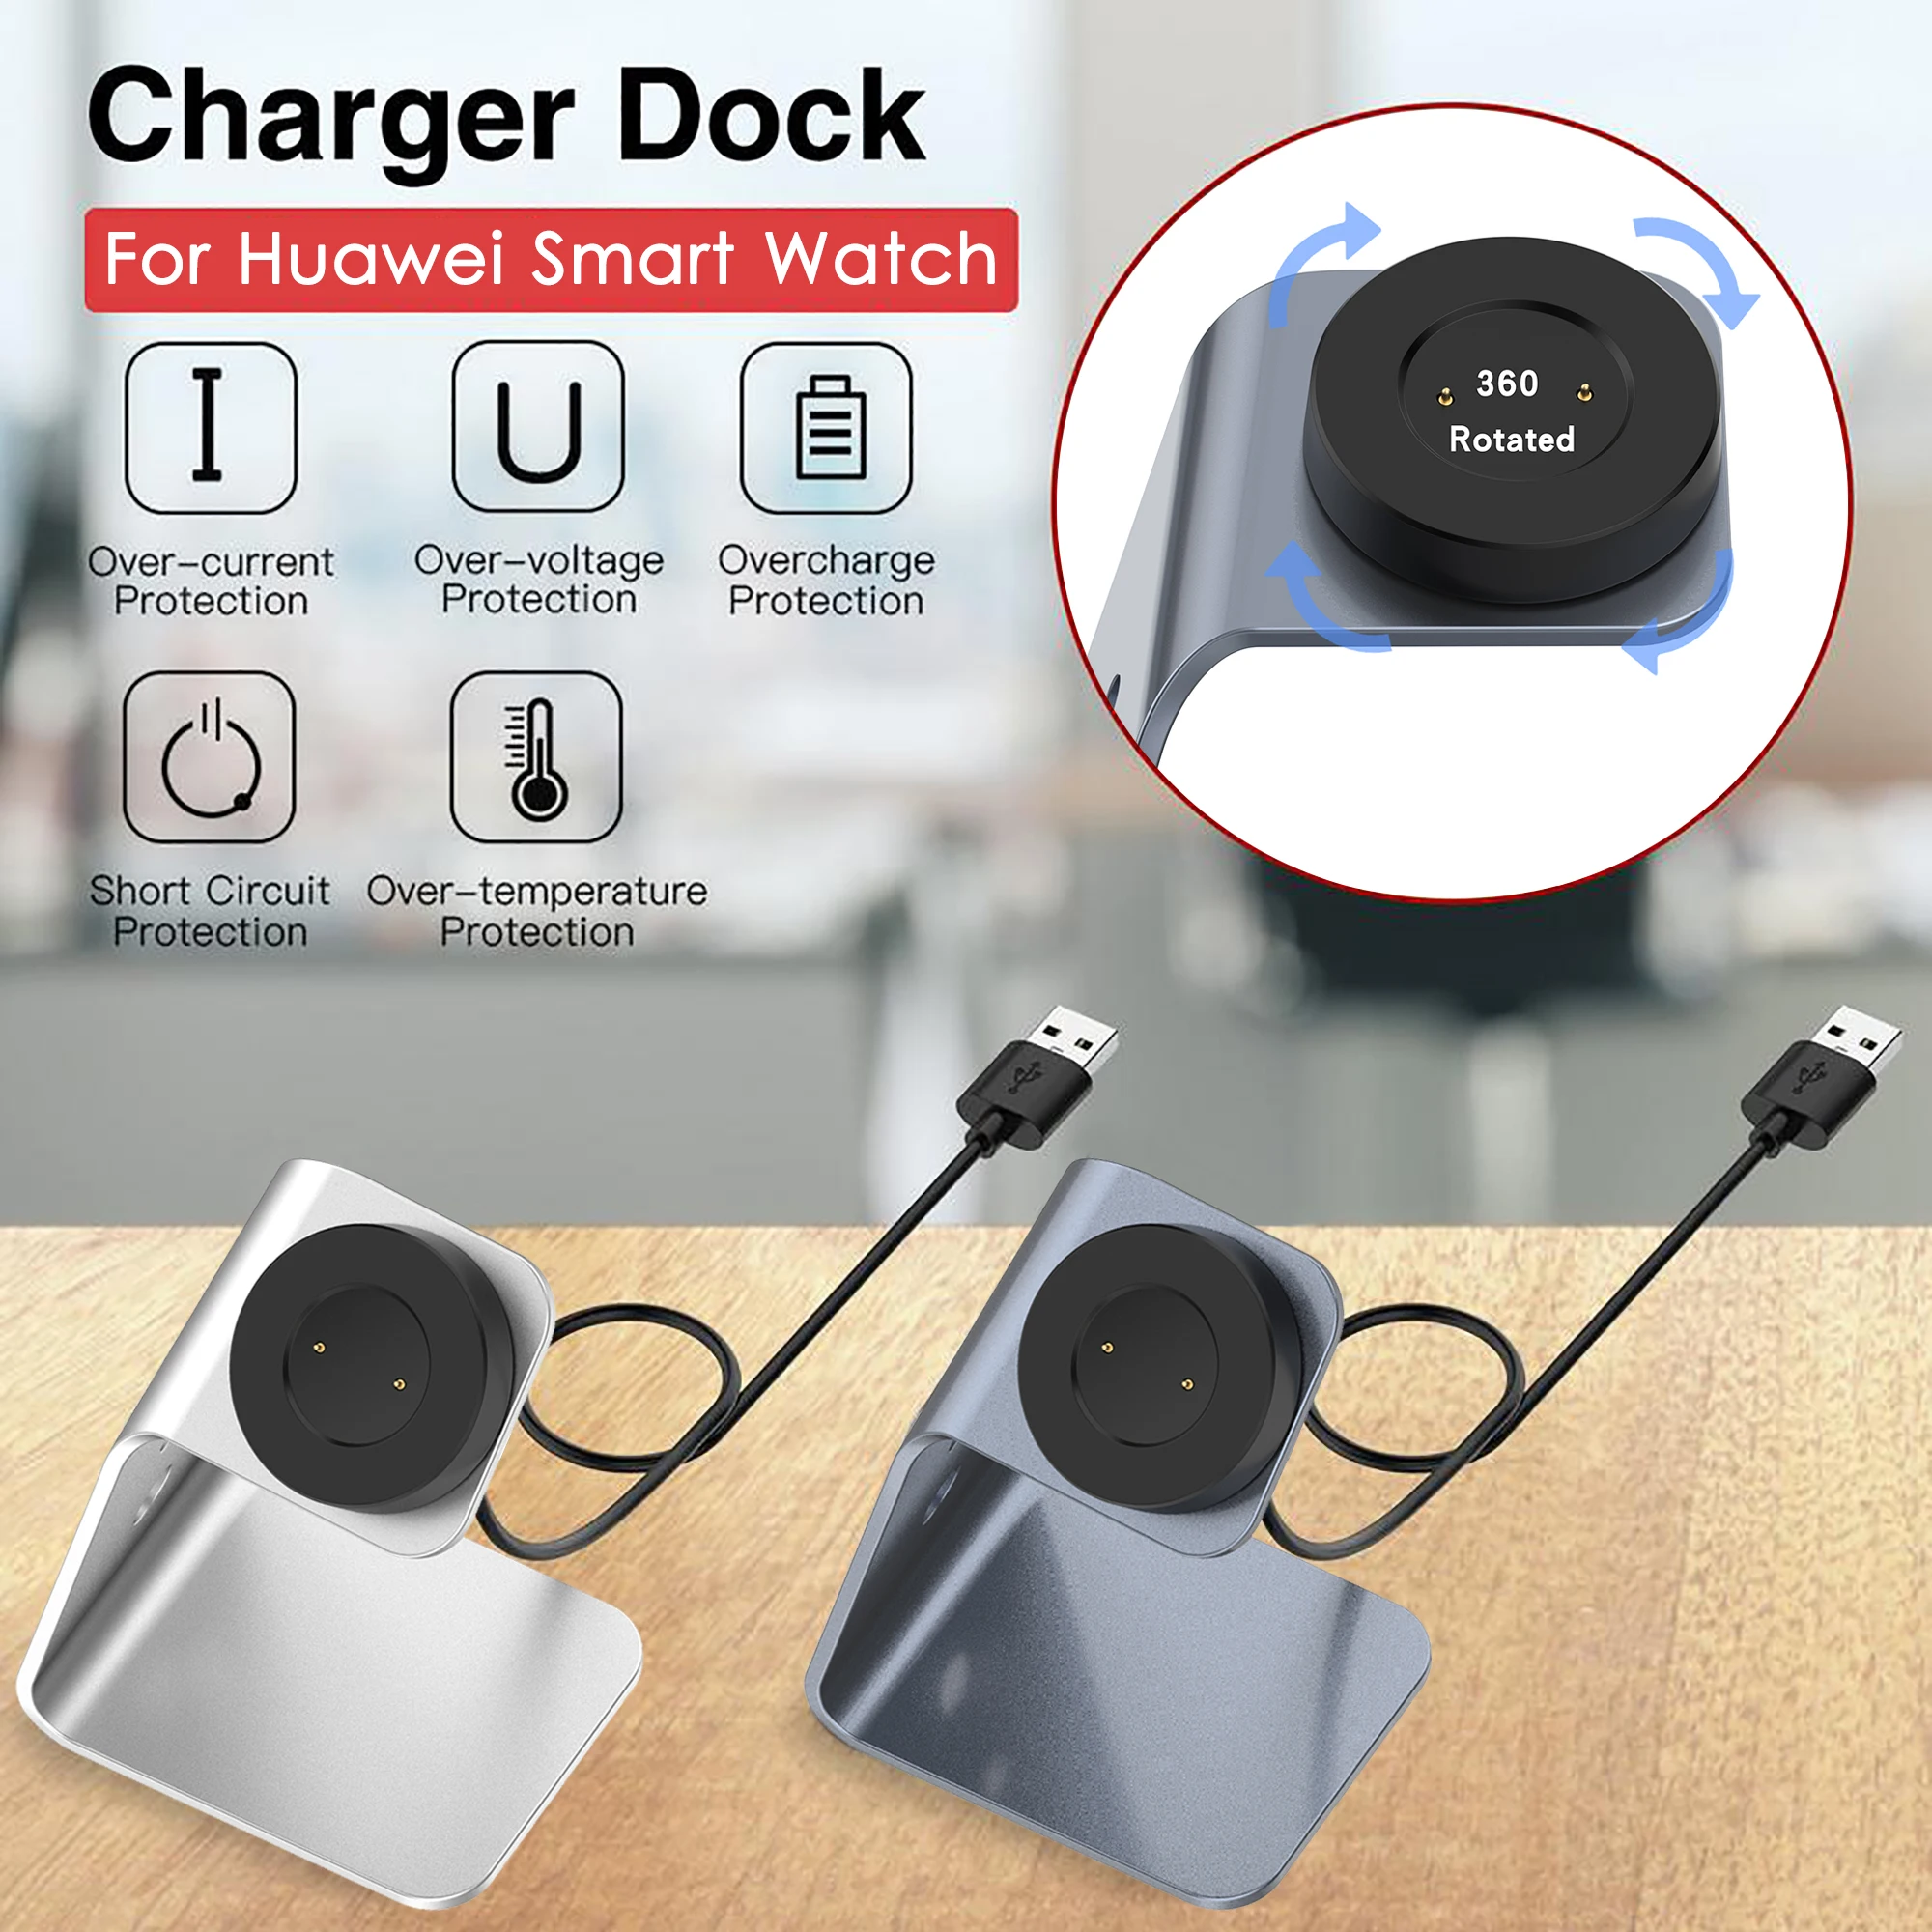 Charger Dock Base Adapte For Huawei Watch GT 2e/GT 2/GT SmartWatch Charging Cable Cradle For Honor Watch Magic USB Fast Charging